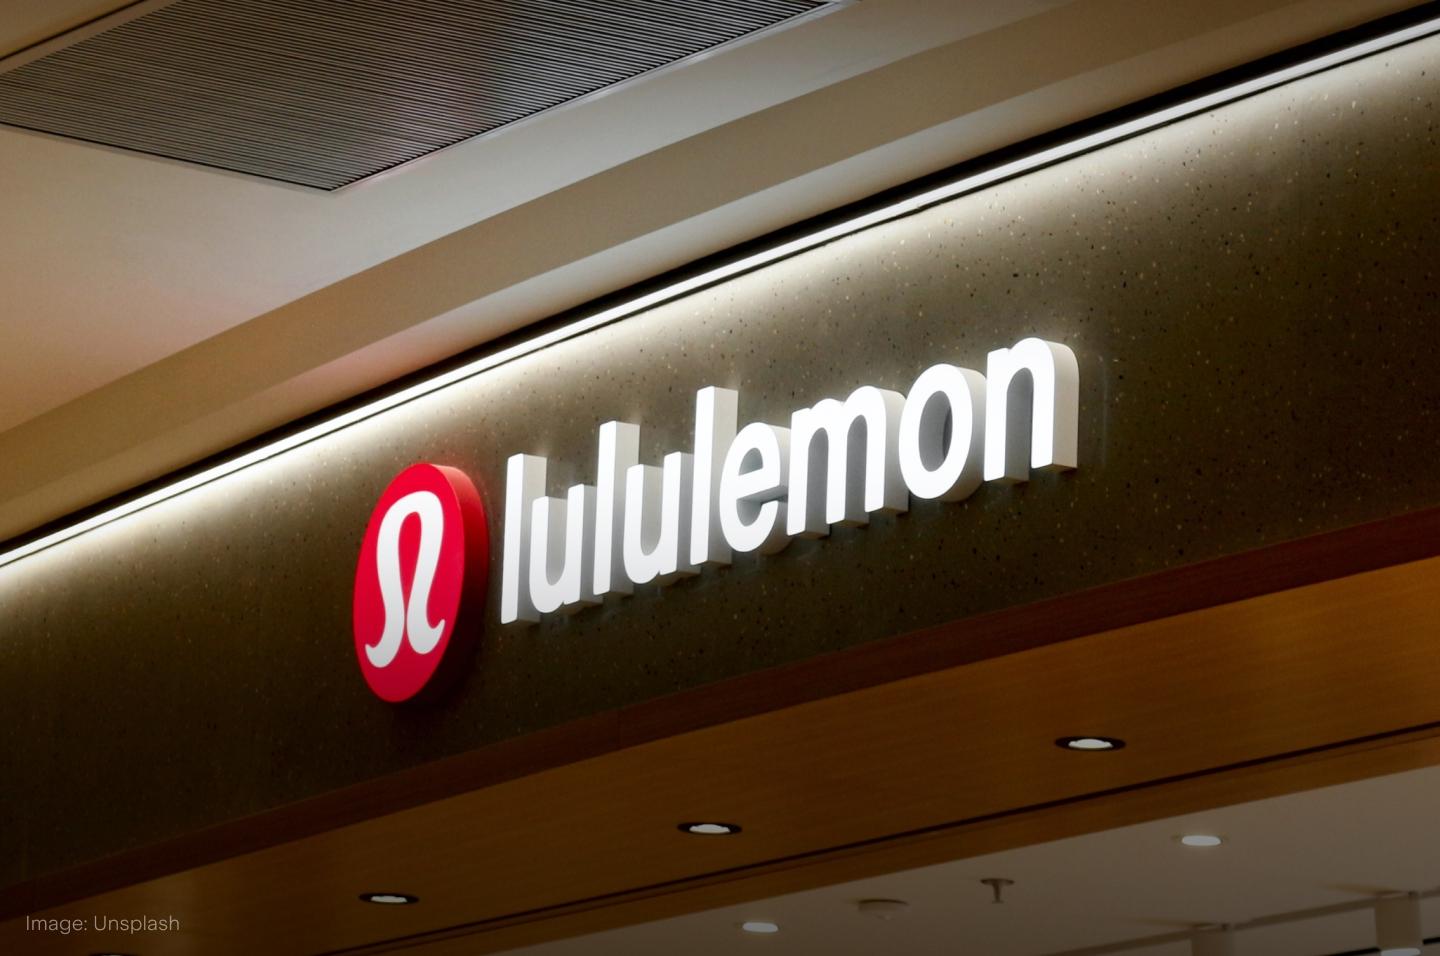 Wall Street analysts rate Lululemon (LULU) stock a 'buy' with a 12